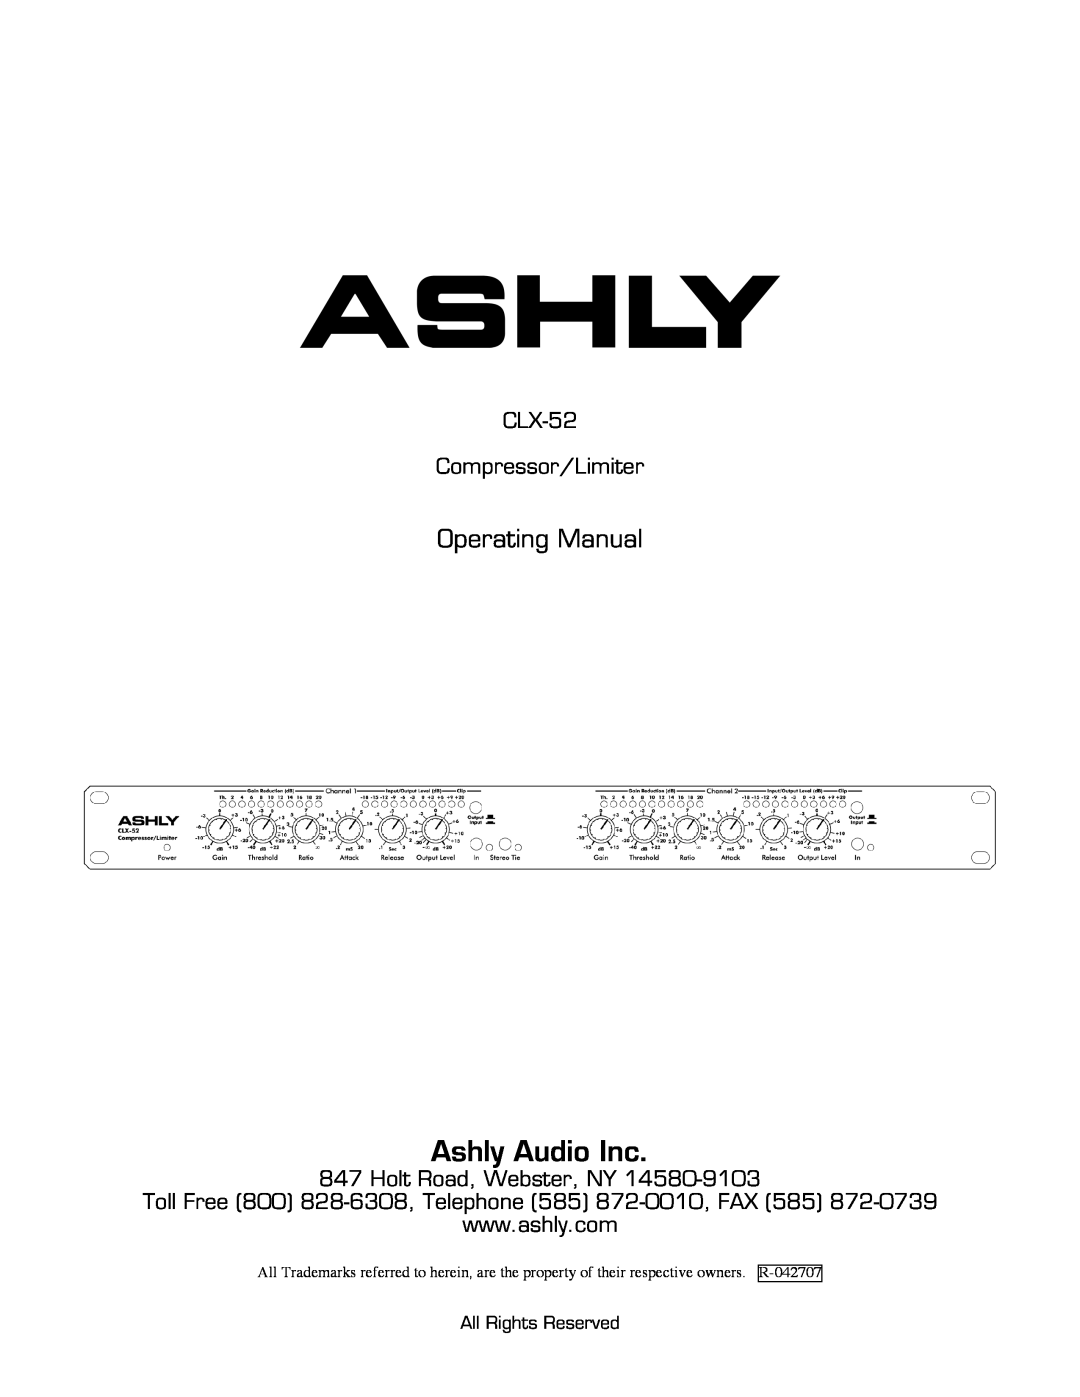 Ashly manual Operating Manual, CLX-52 Compressor/Limiter, Holt Road, Webster, NY, Ashly Audio Inc, All Rights Reserved 